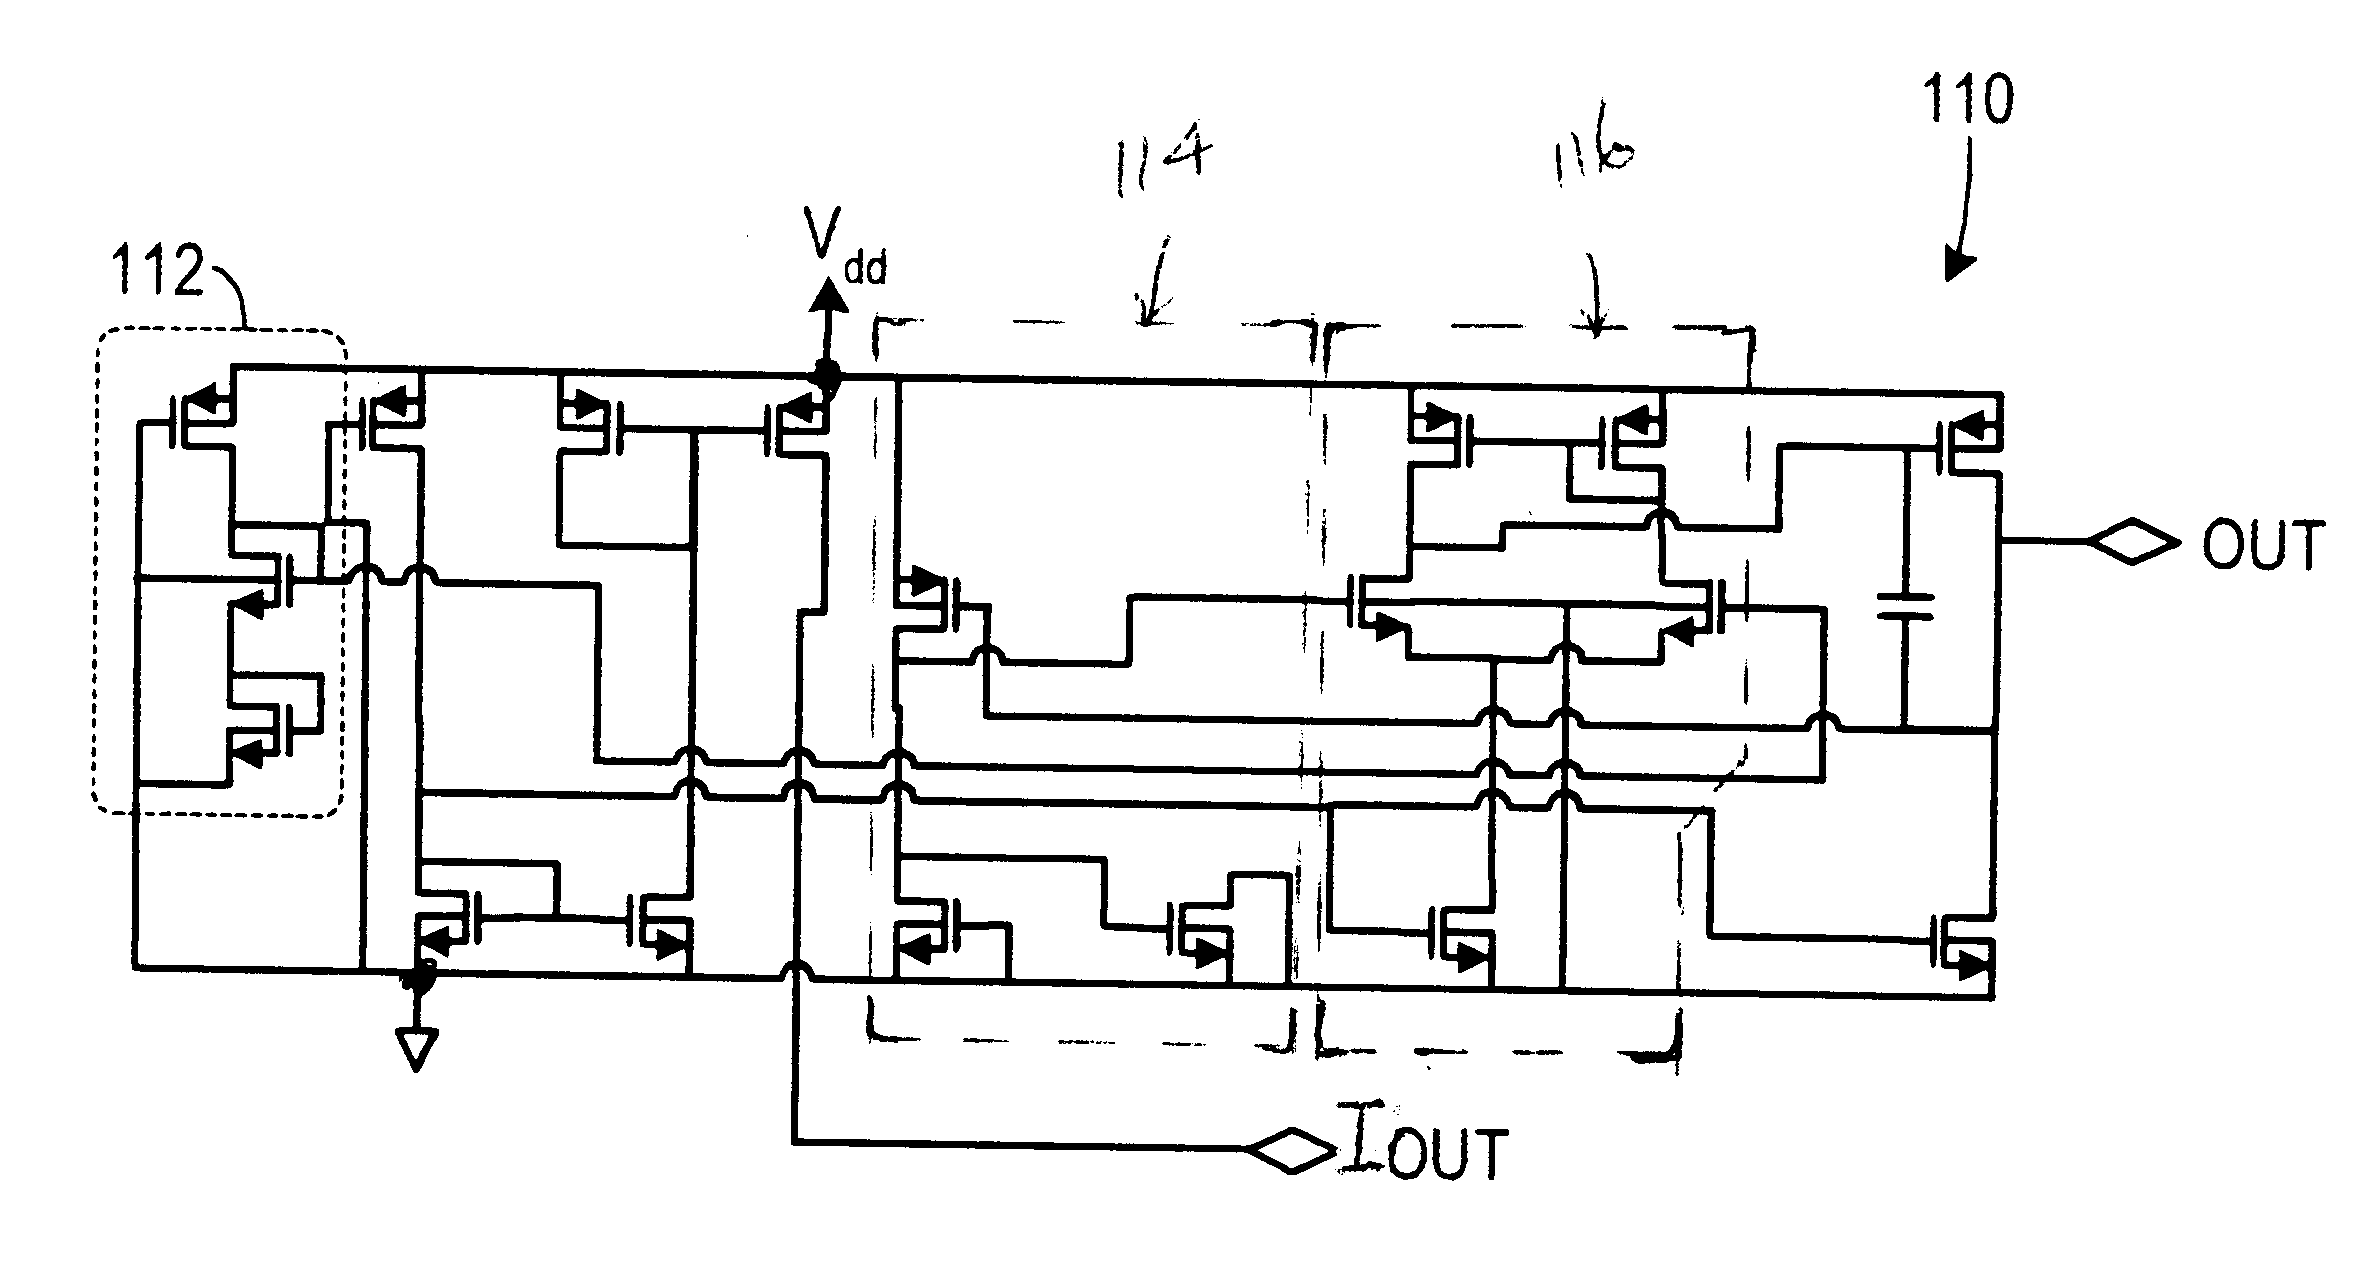 Bias cell for four transistor (4T) SRAM operation